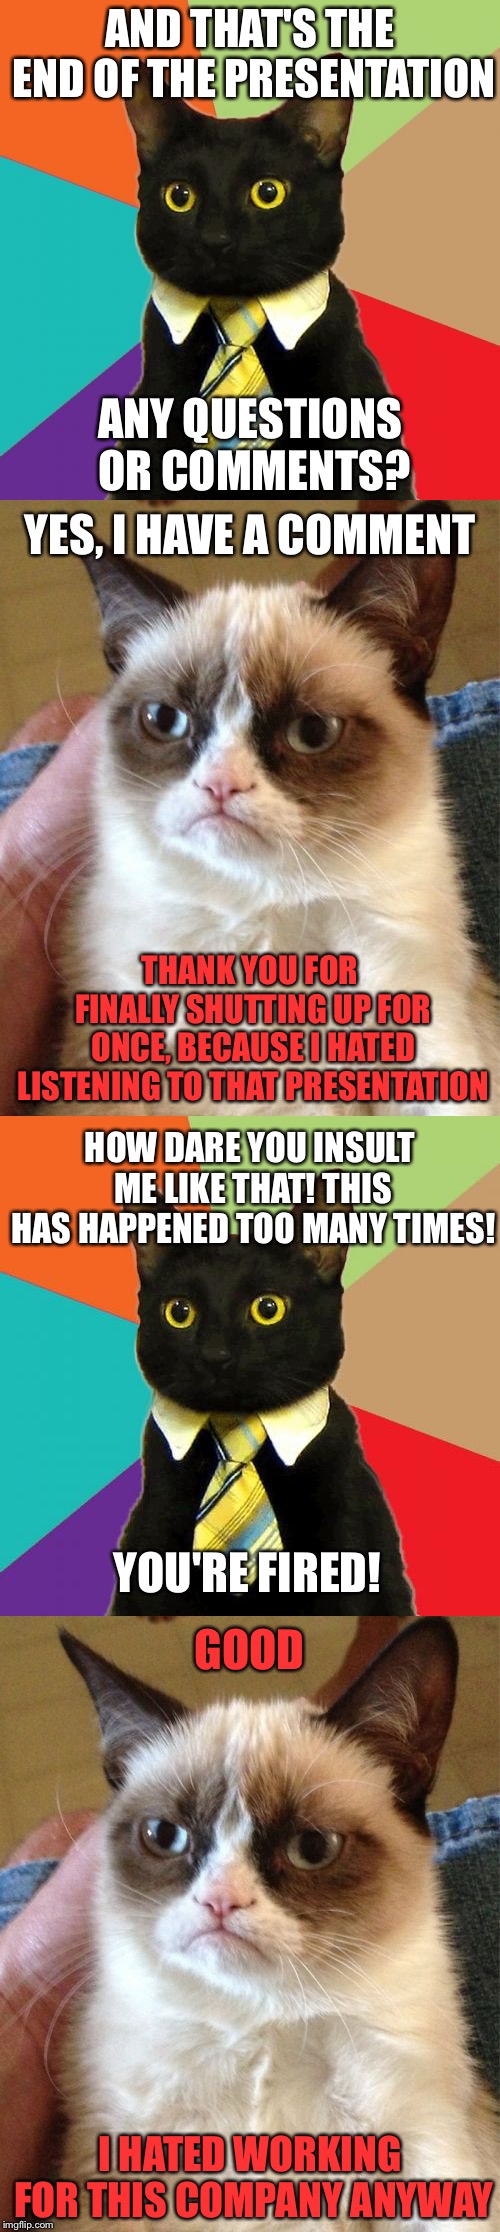 Grumpy Cat's Done with this Company | AND THAT'S THE END OF THE PRESENTATION; ANY QUESTIONS OR COMMENTS? YES, I HAVE A COMMENT; THANK YOU FOR FINALLY SHUTTING UP FOR ONCE, BECAUSE I HATED LISTENING TO THAT PRESENTATION; HOW DARE YOU INSULT ME LIKE THAT! THIS HAS HAPPENED TOO MANY TIMES! YOU'RE FIRED! GOOD; I HATED WORKING FOR THIS COMPANY ANYWAY | image tagged in memes,business cat,grumpy cat,you're fired,long memes | made w/ Imgflip meme maker